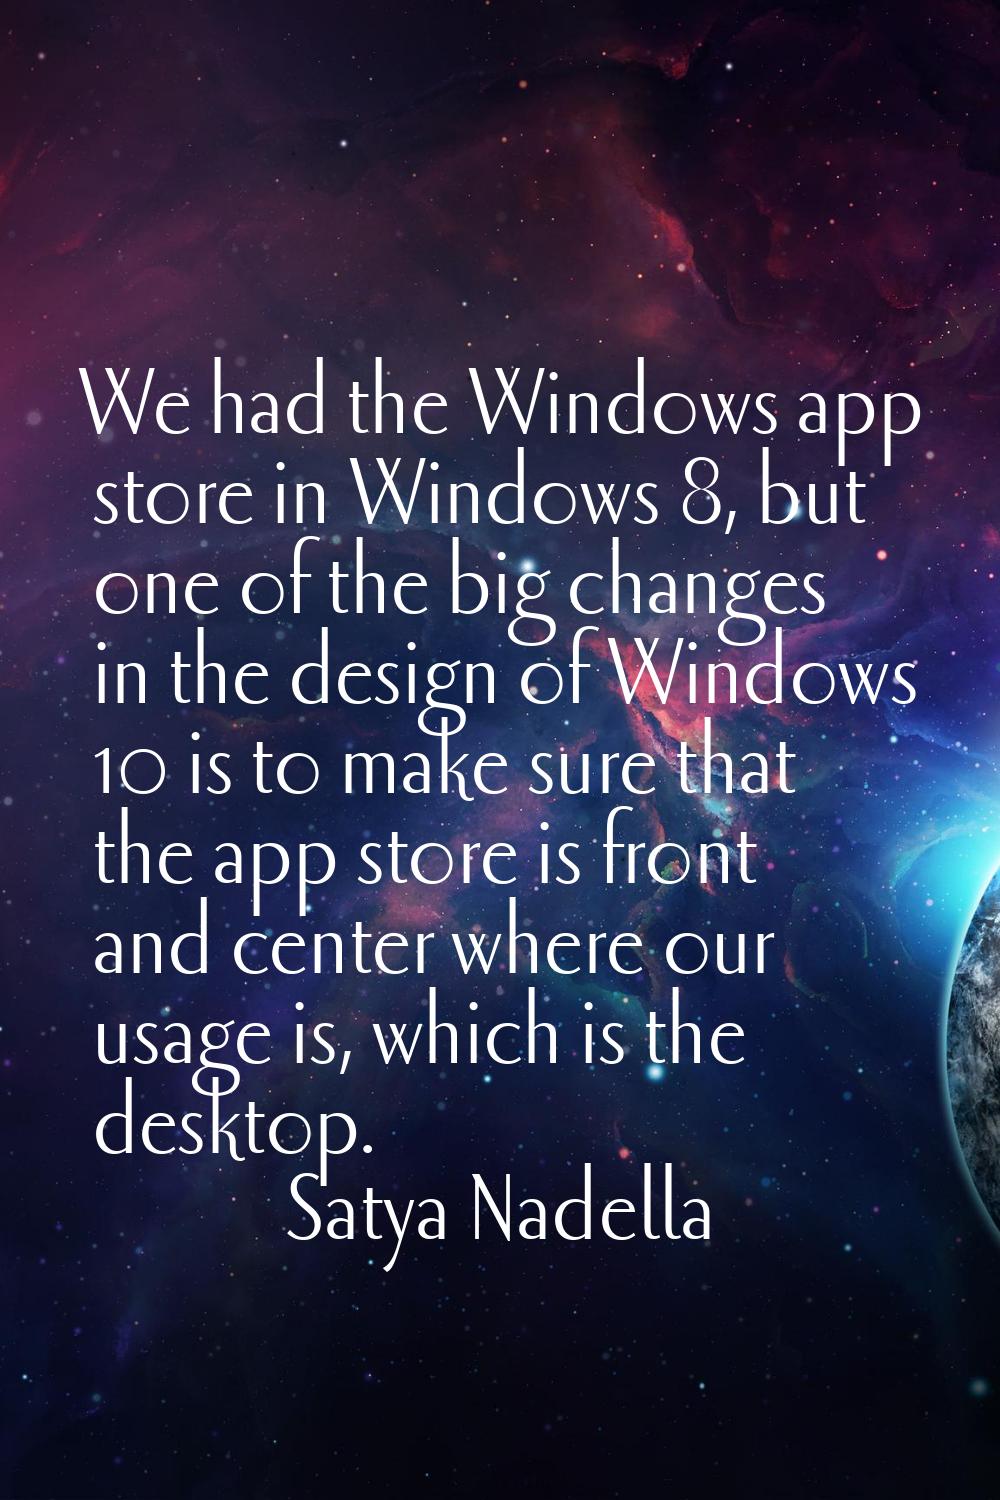 We had the Windows app store in Windows 8, but one of the big changes in the design of Windows 10 i